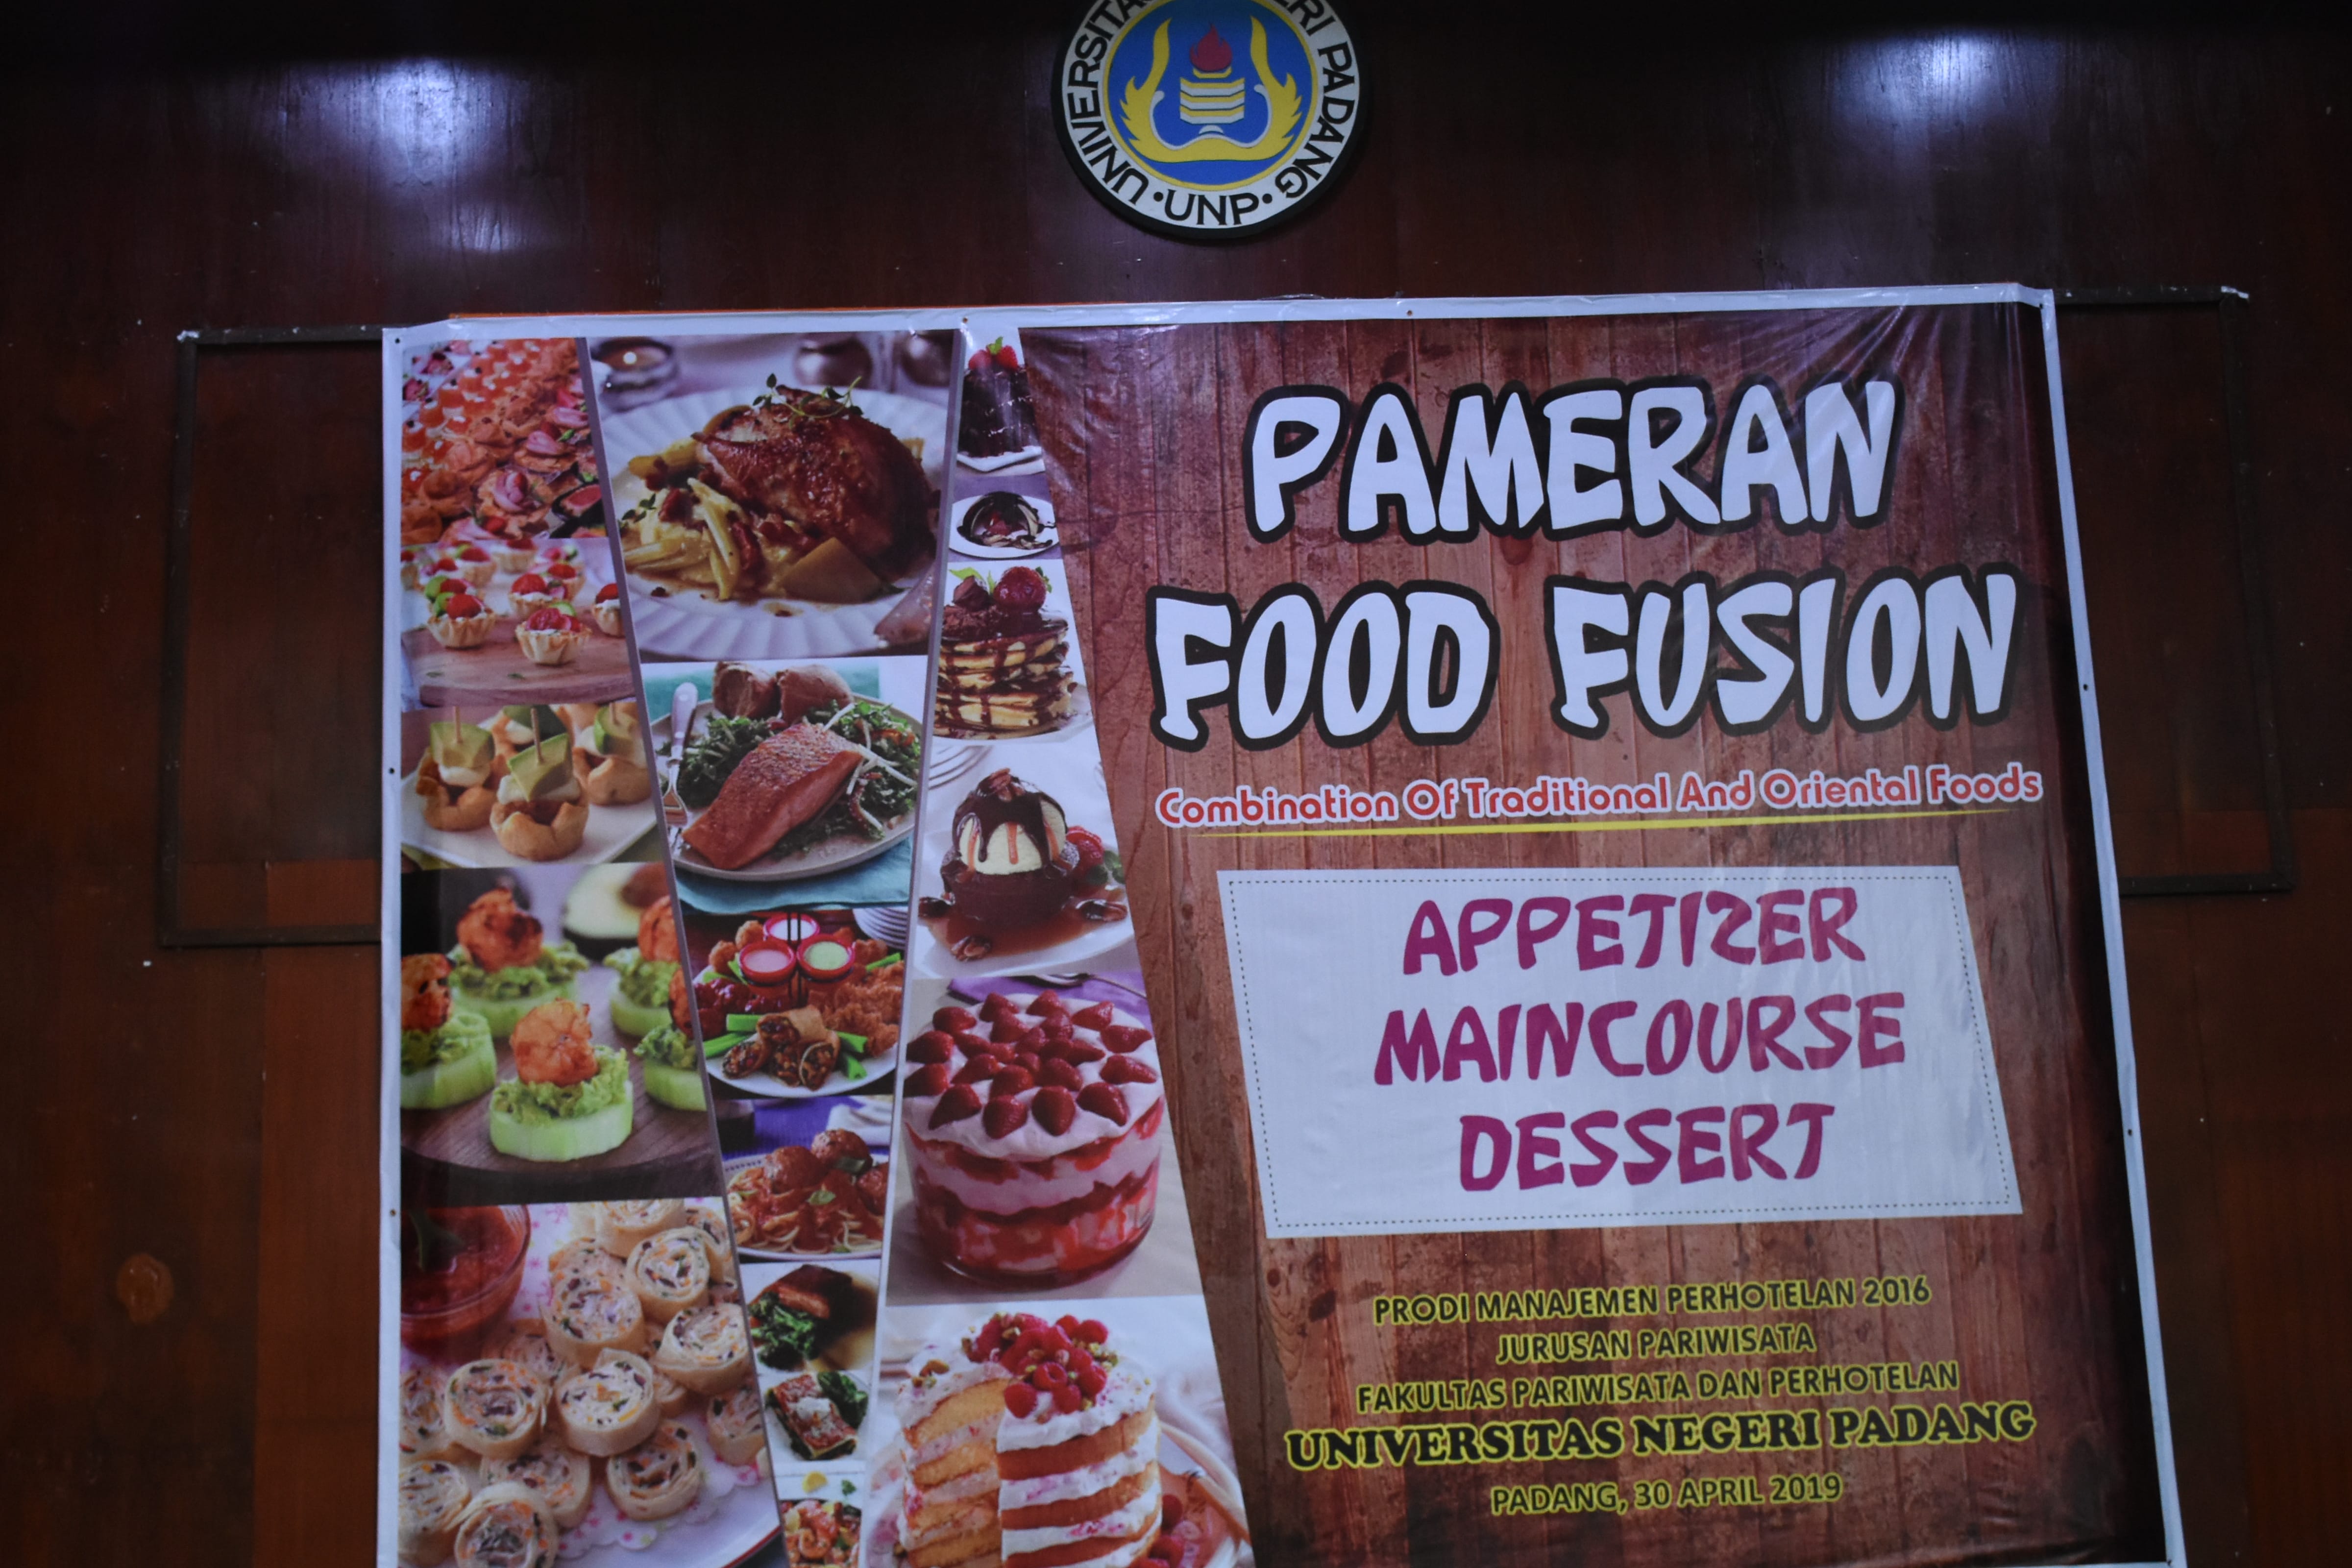 You are currently viewing Pameran Food Fusion, Combination of Traditional and Oriental Foods “Prodi Manajemen Perhotelan 2016”